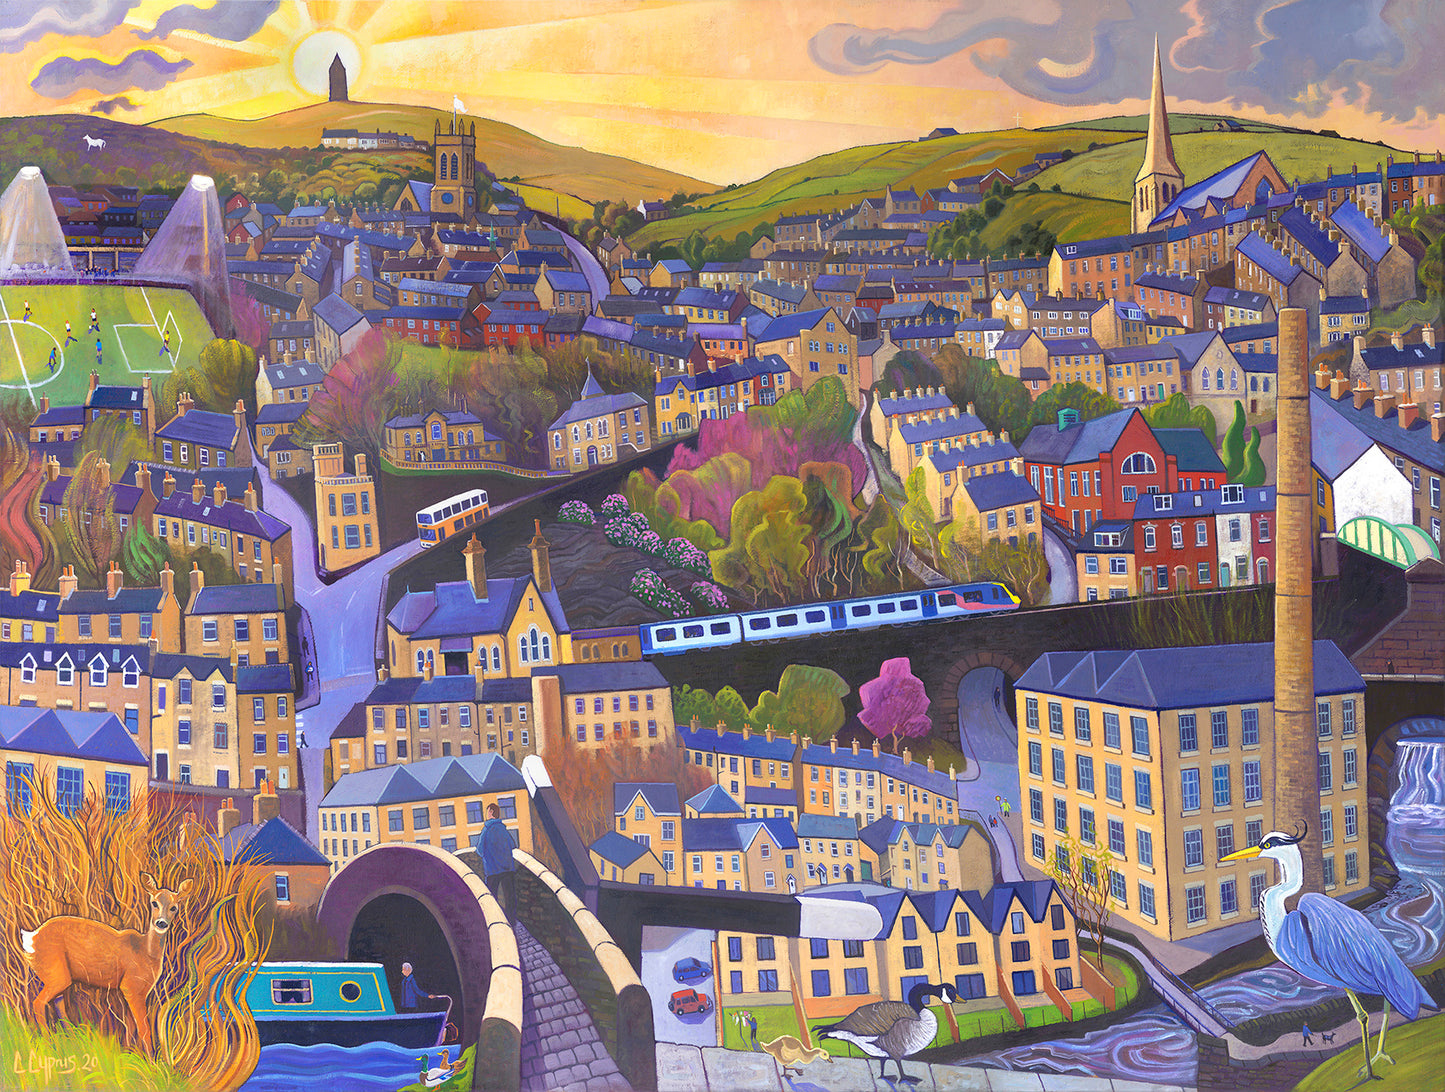 Painting 'Old Milltown' by famous Northern artist Chris Cyprus. Now available as a 1000 piece jigsaw  